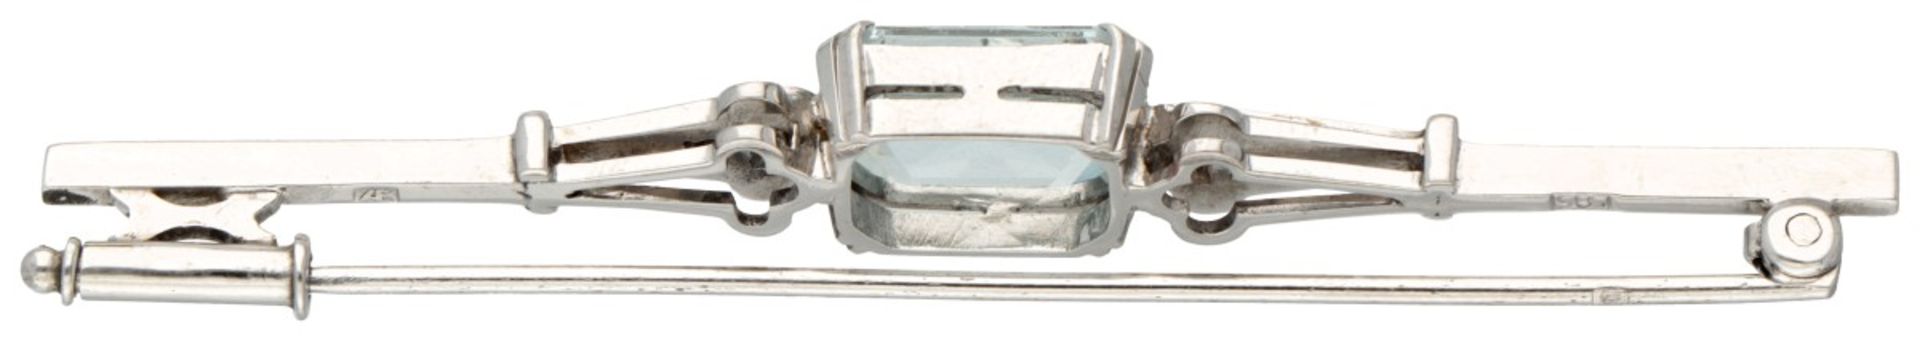 14K. White gold brooch set with approx. 3.15 ct. aquamarine and diamond. - Image 3 of 3